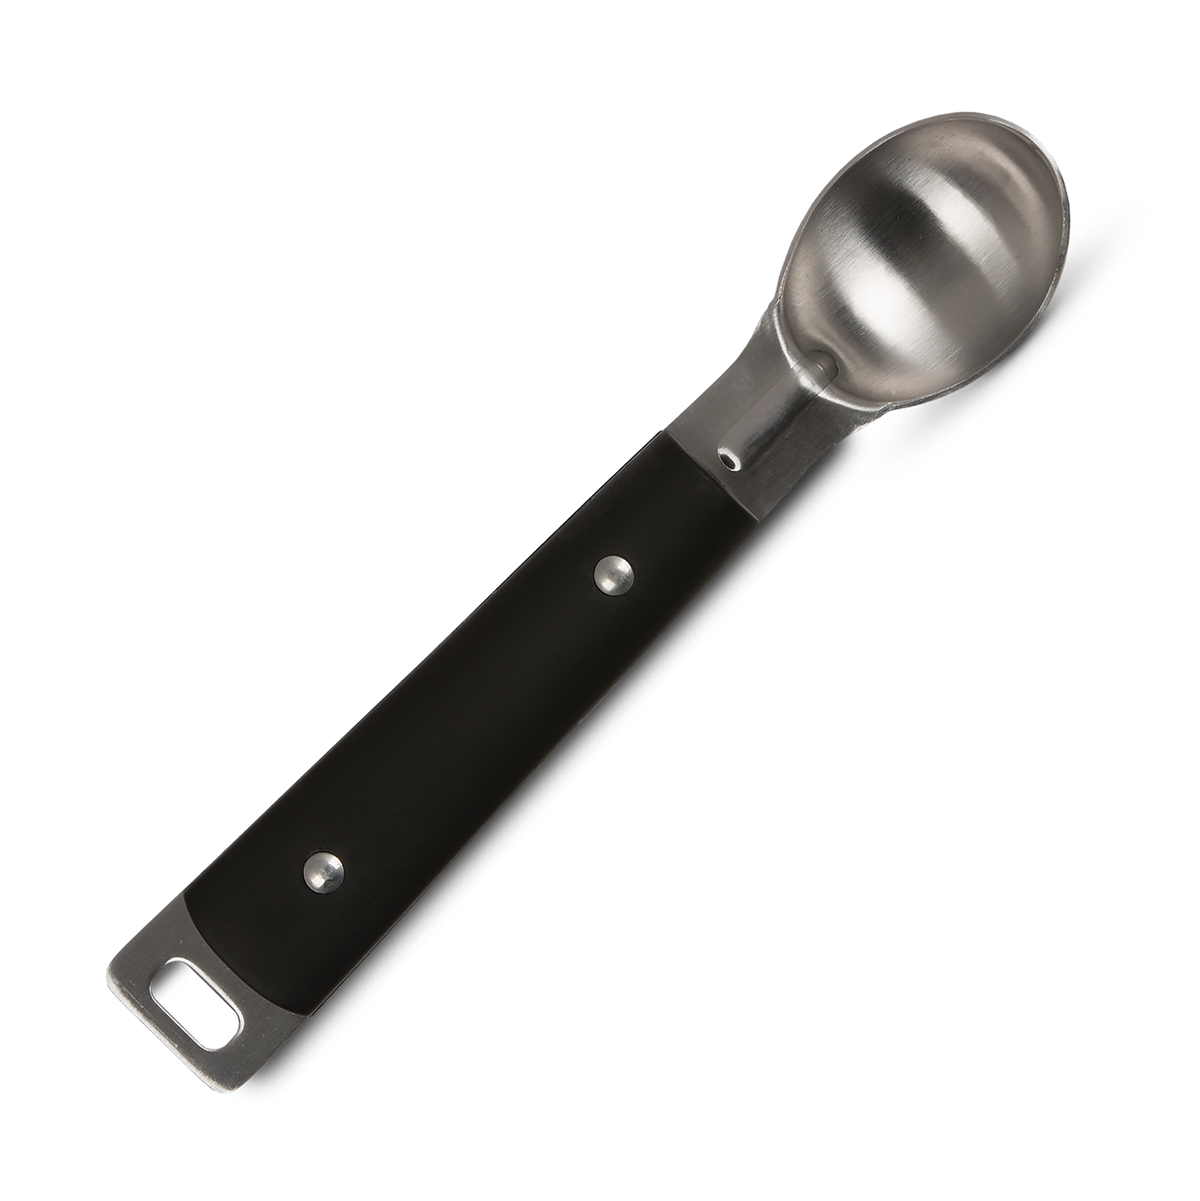 Ice Cream Scoop: stainless steel, quality tools, non-slip grip, riveted construction, Brandless. Designed for kitchen.